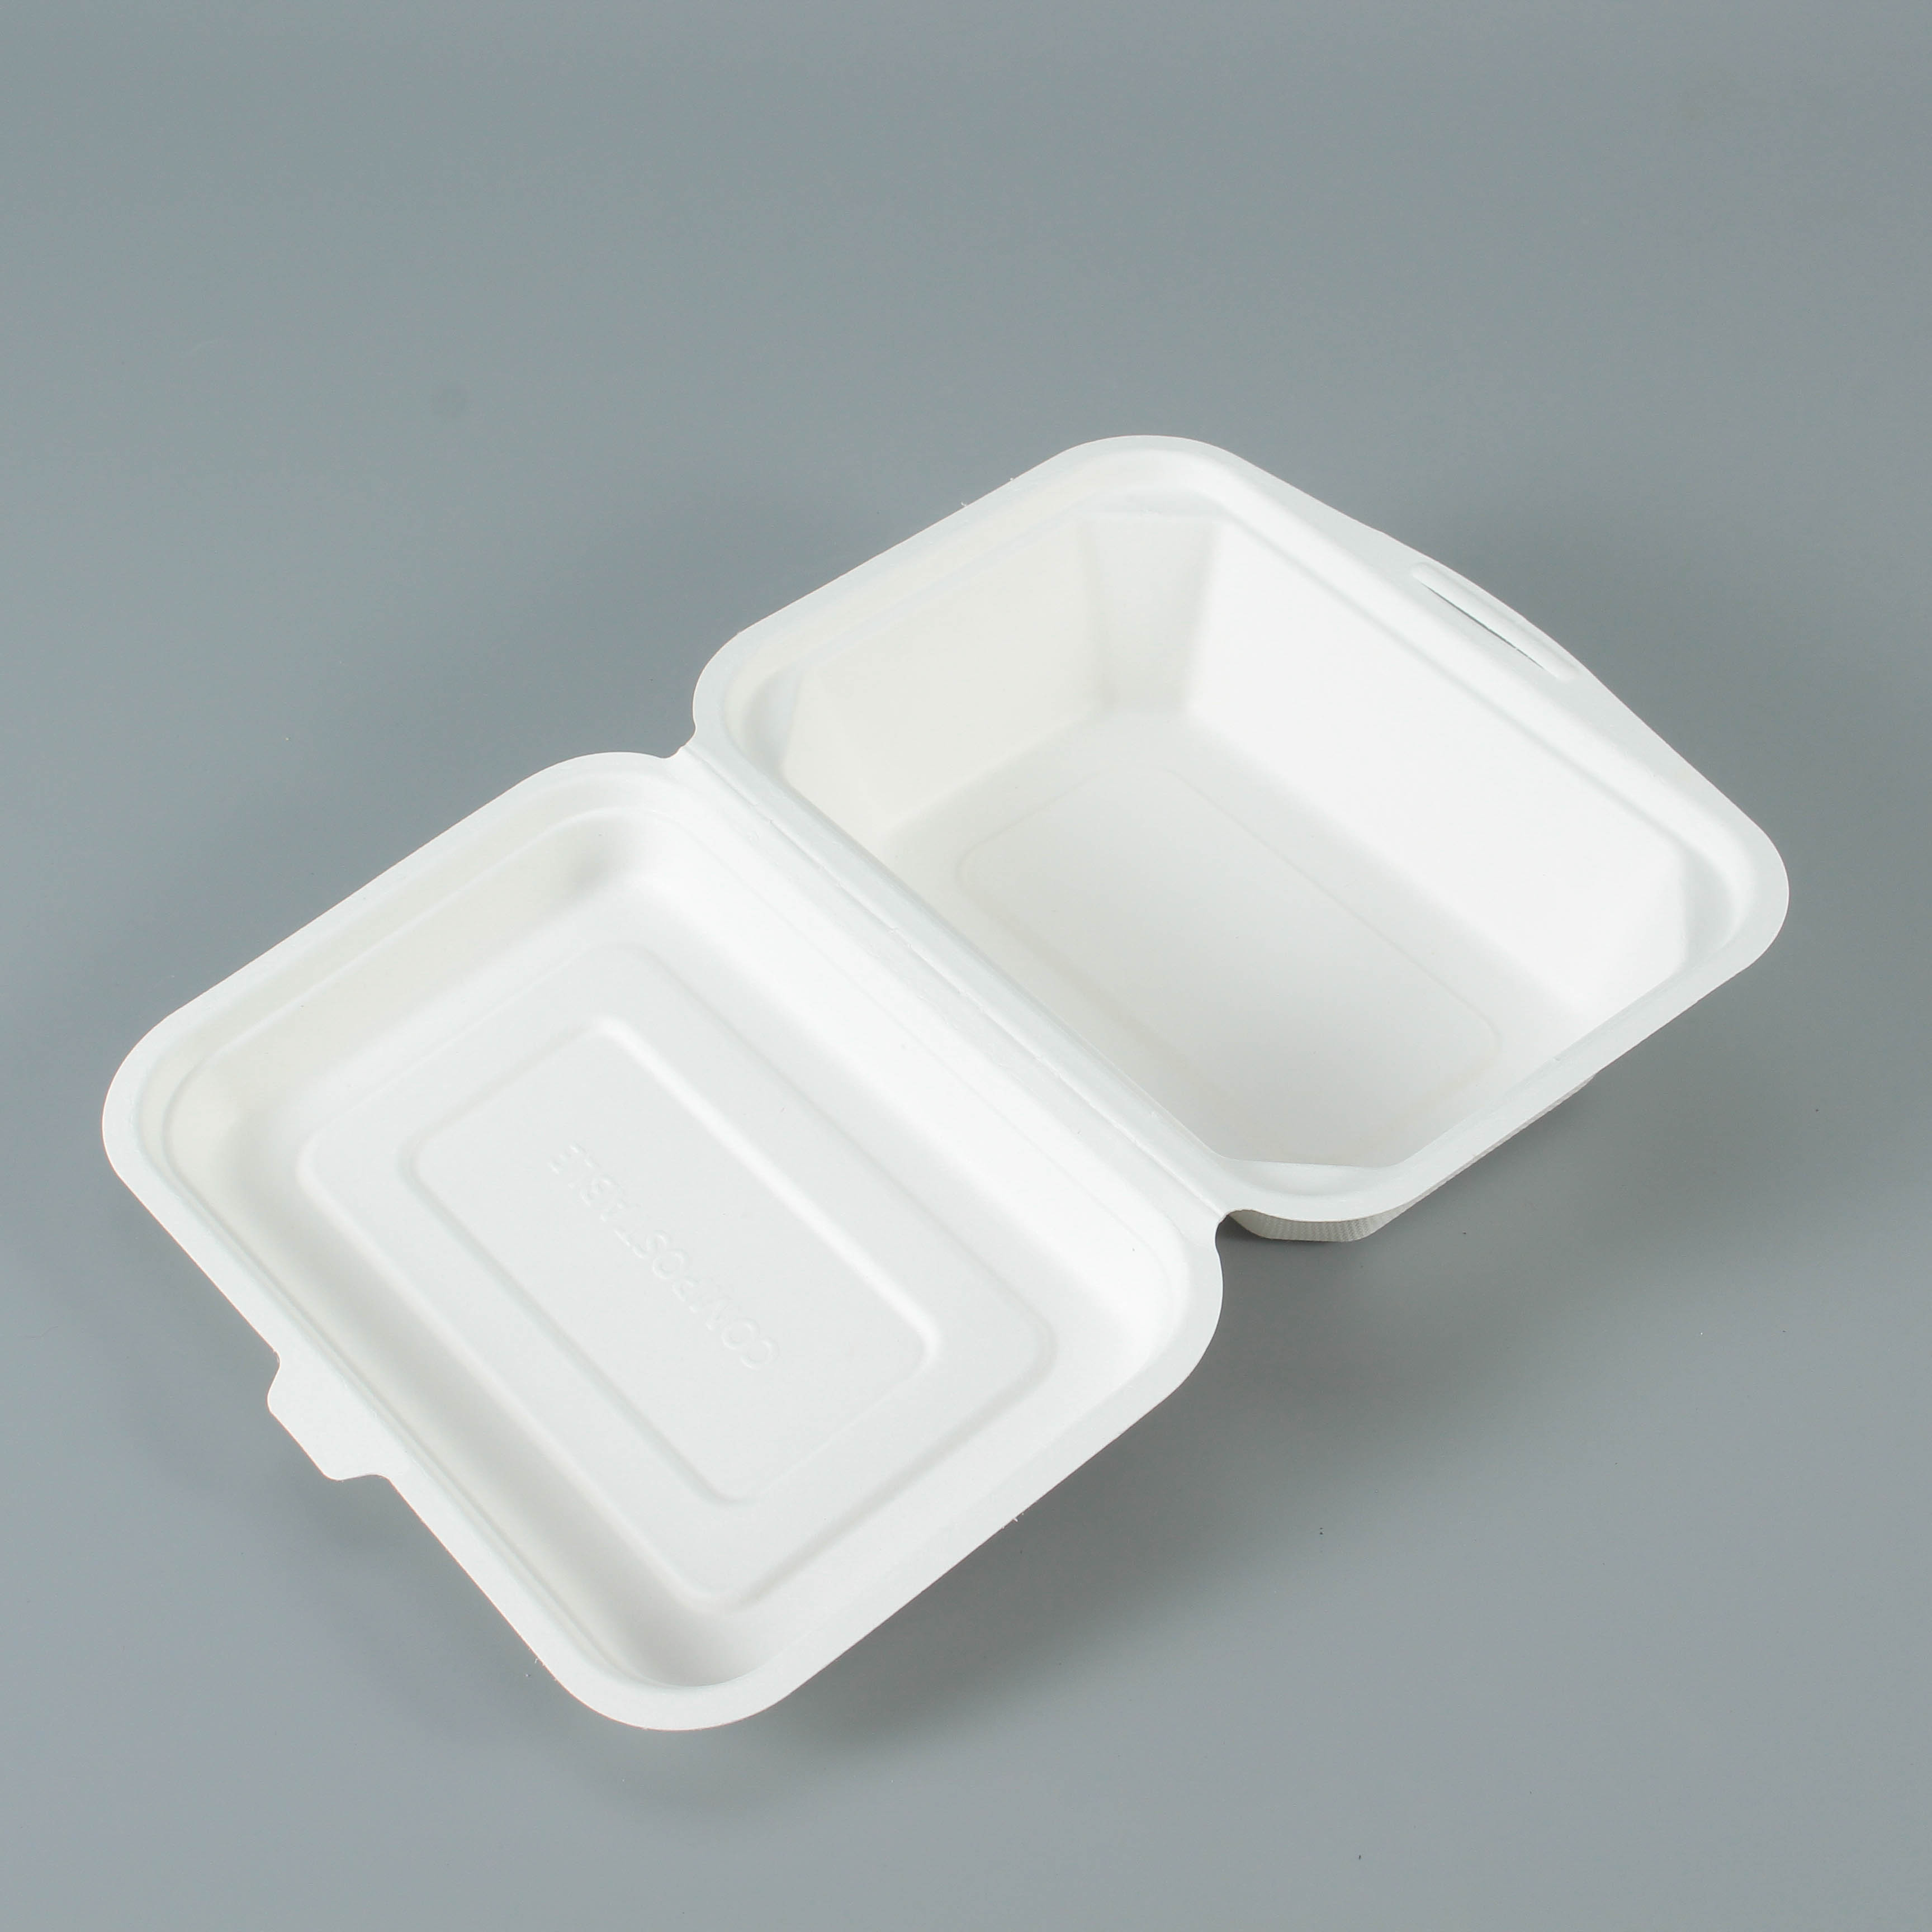 600ml Clamshell Takeout Containers